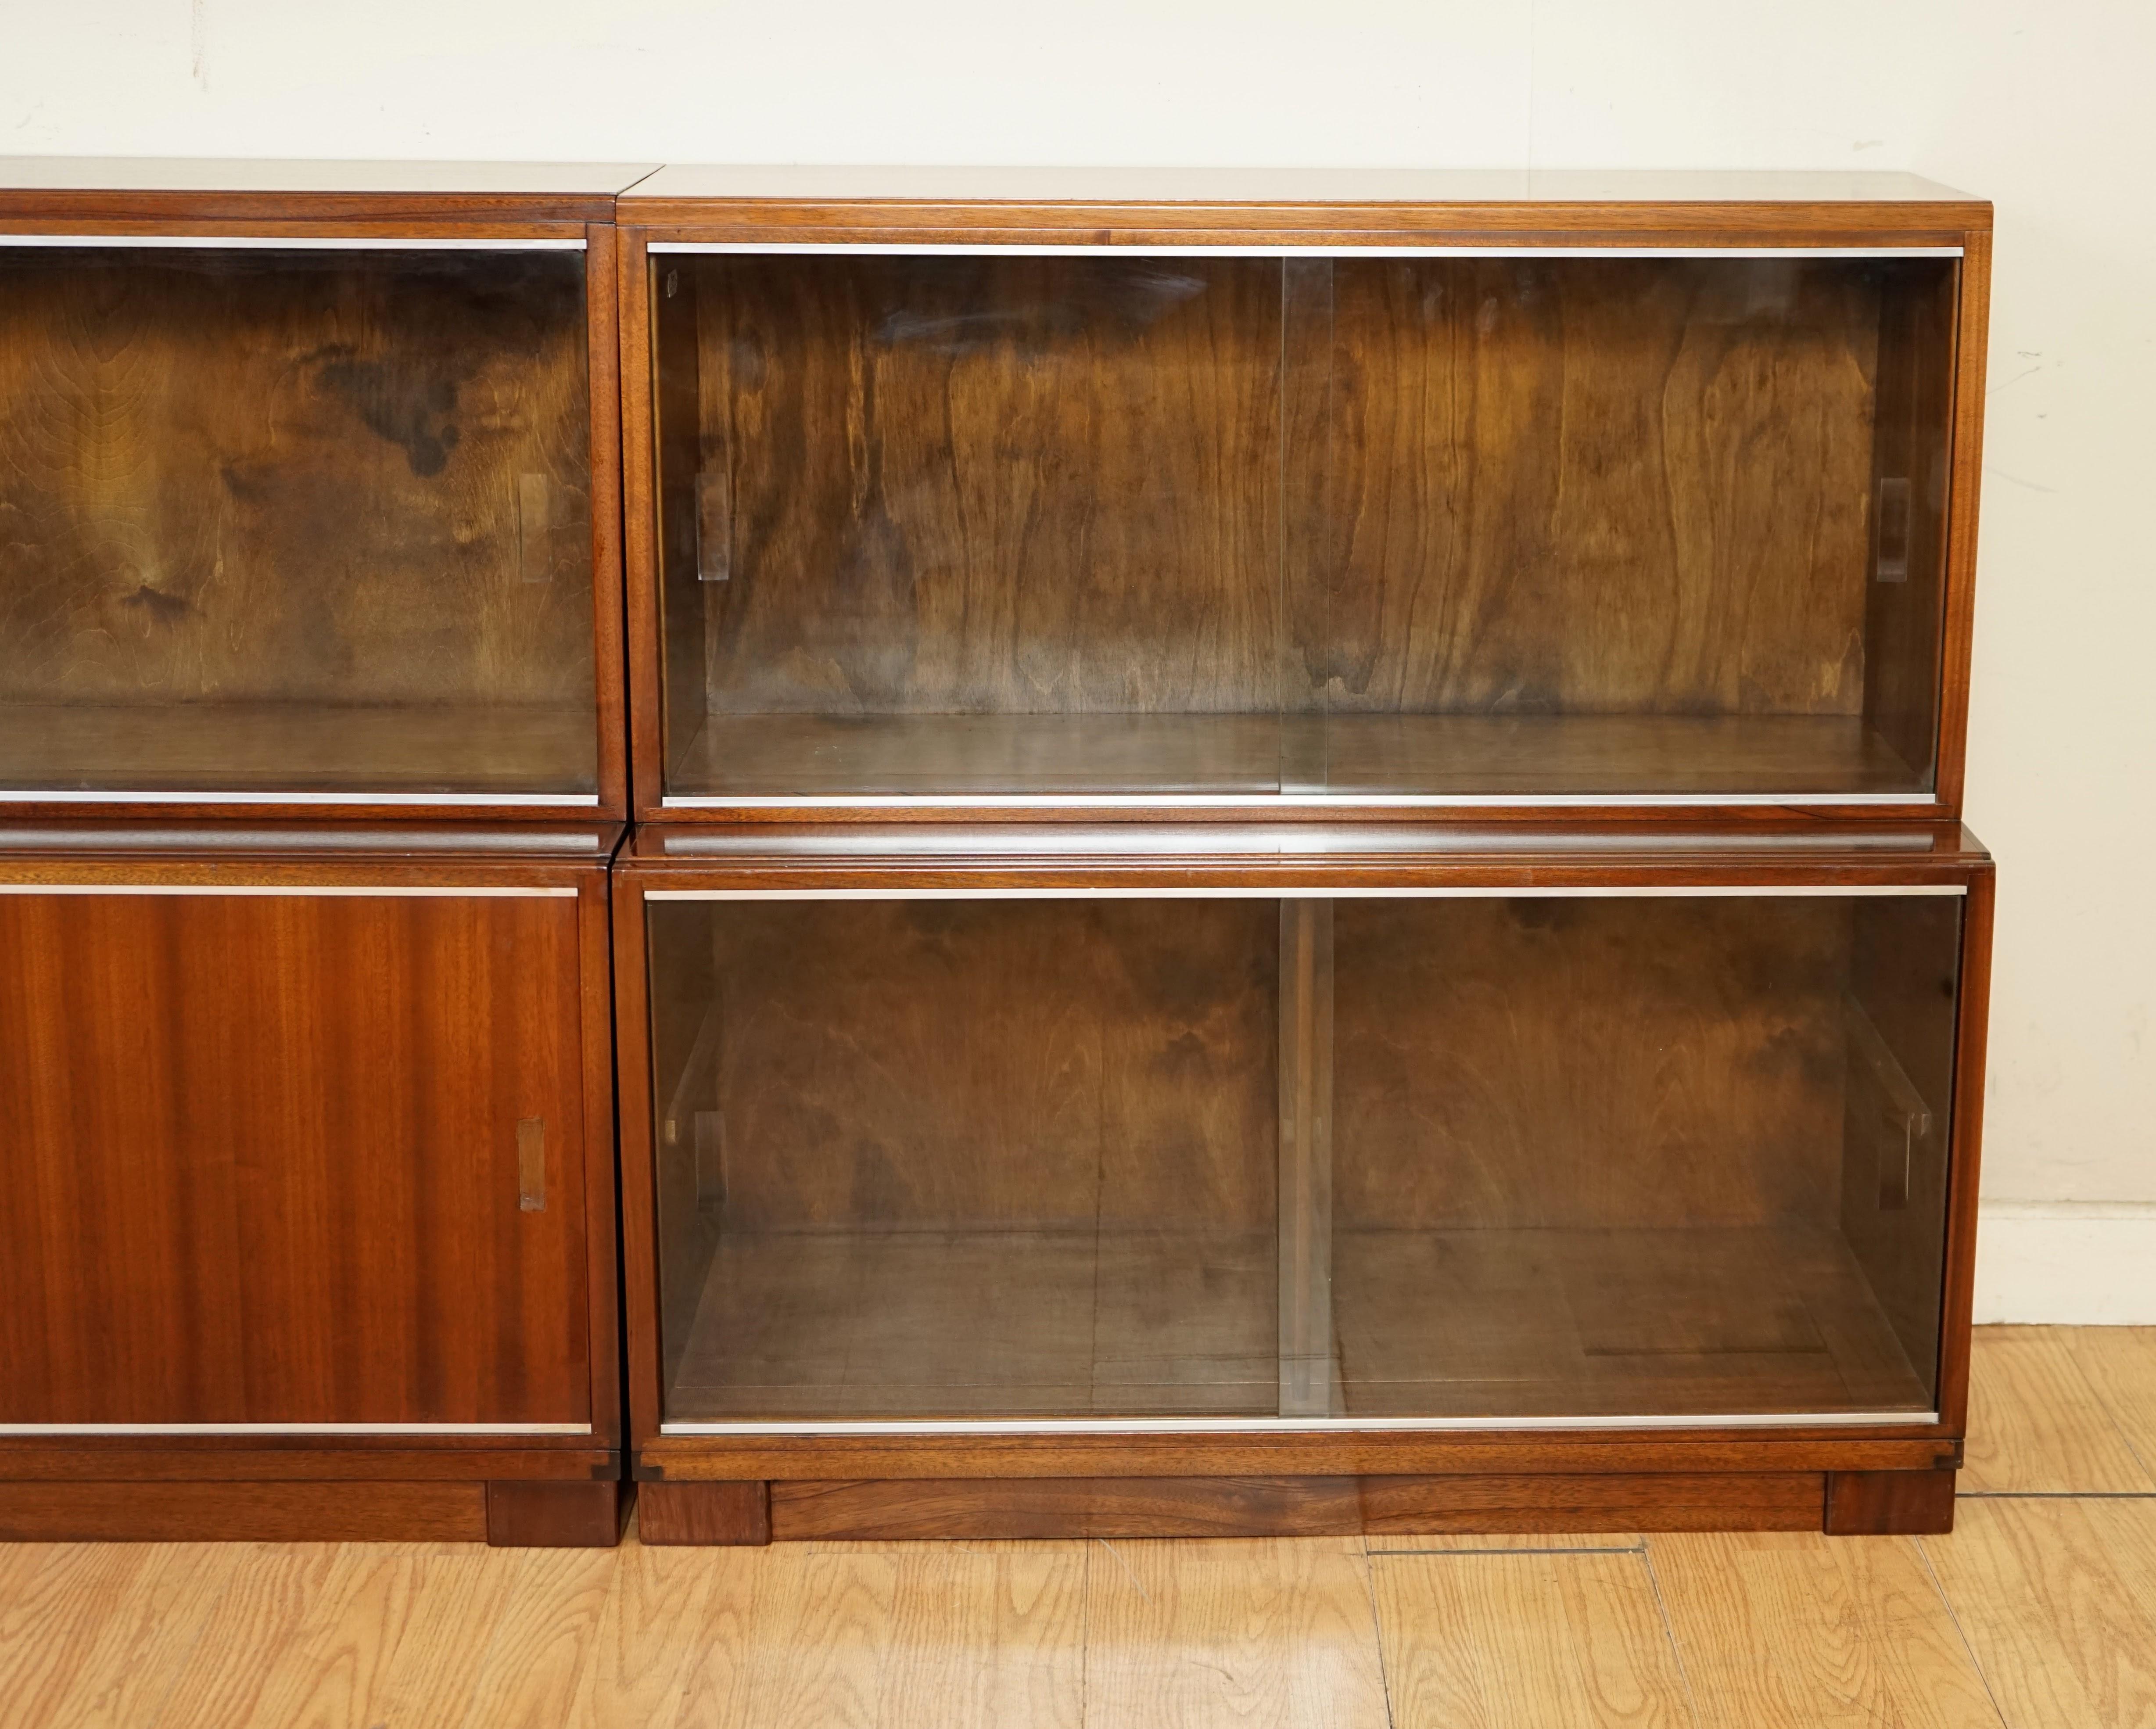 Hardwood Minty of Oxford Vintage Set of Three Modular Stacking Libary Bookcases